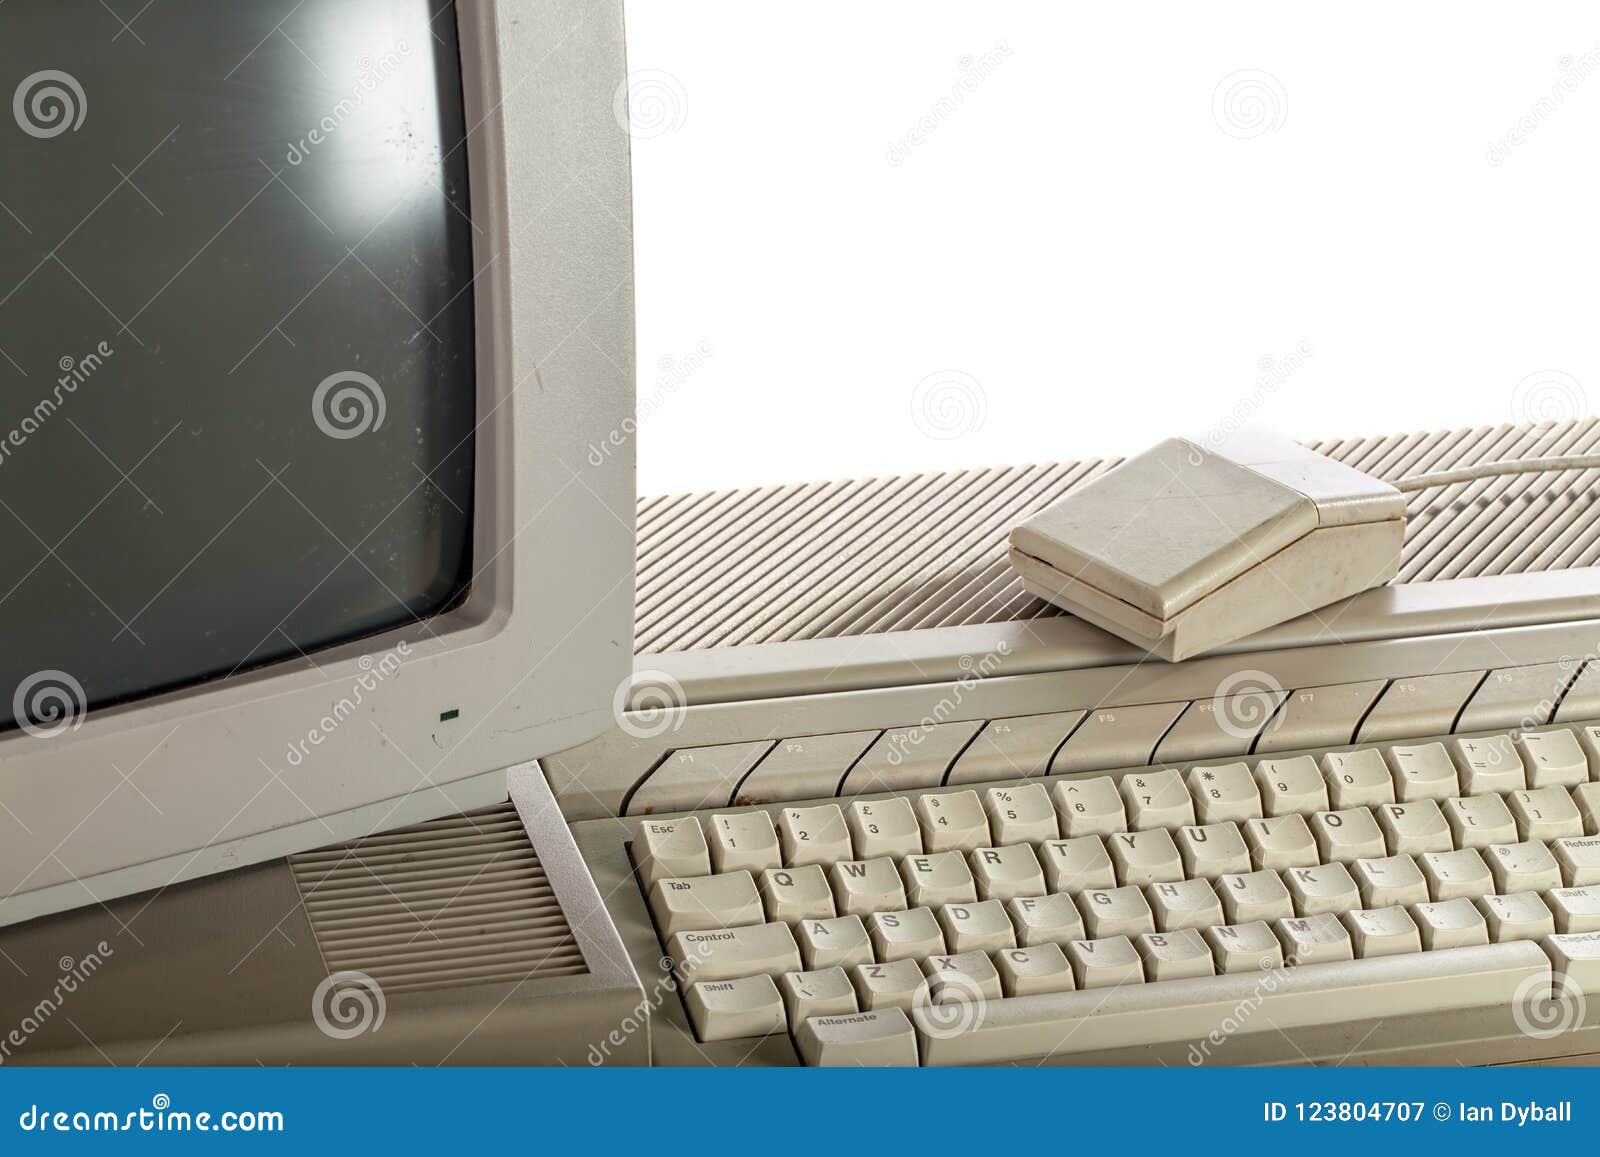 outdated technology. dirty vintage computer system with keyboard